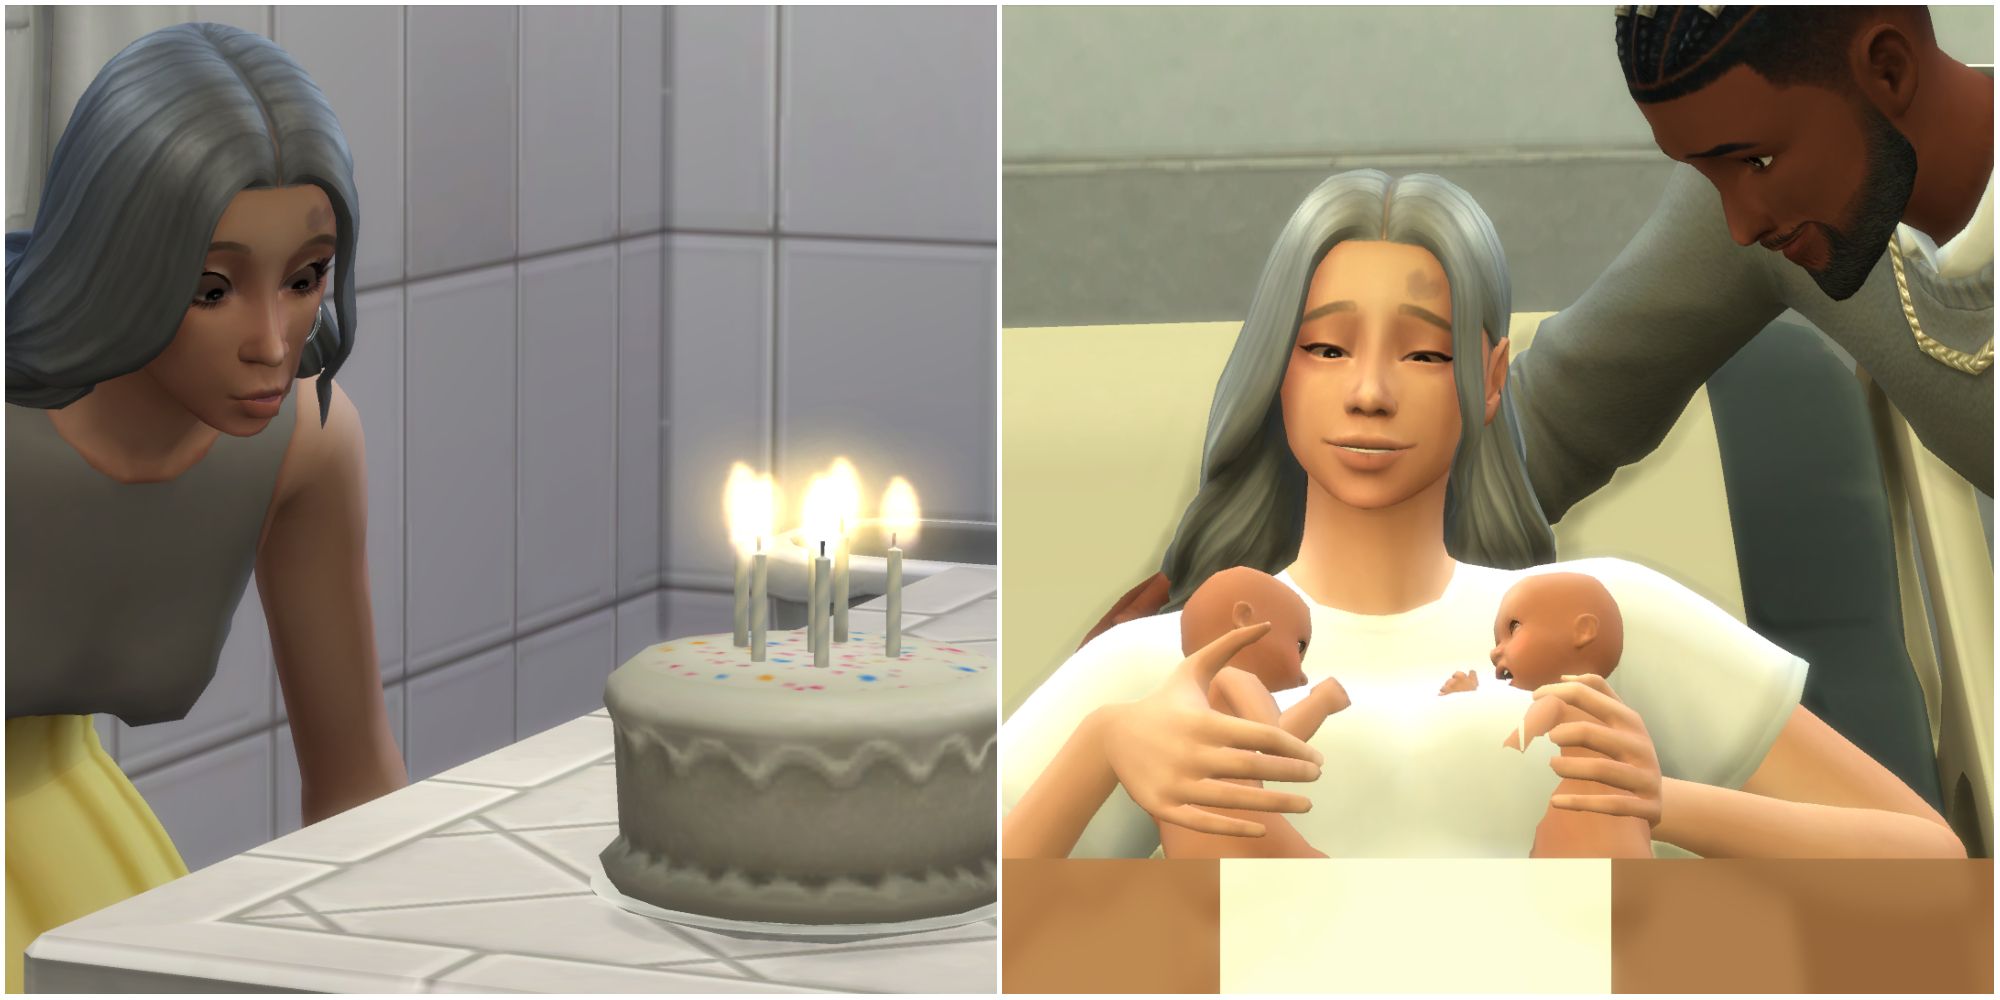 Showcasing a Sim having a birthday and having kids for a legacy challenge, a great way to tell stories in The Sims 4